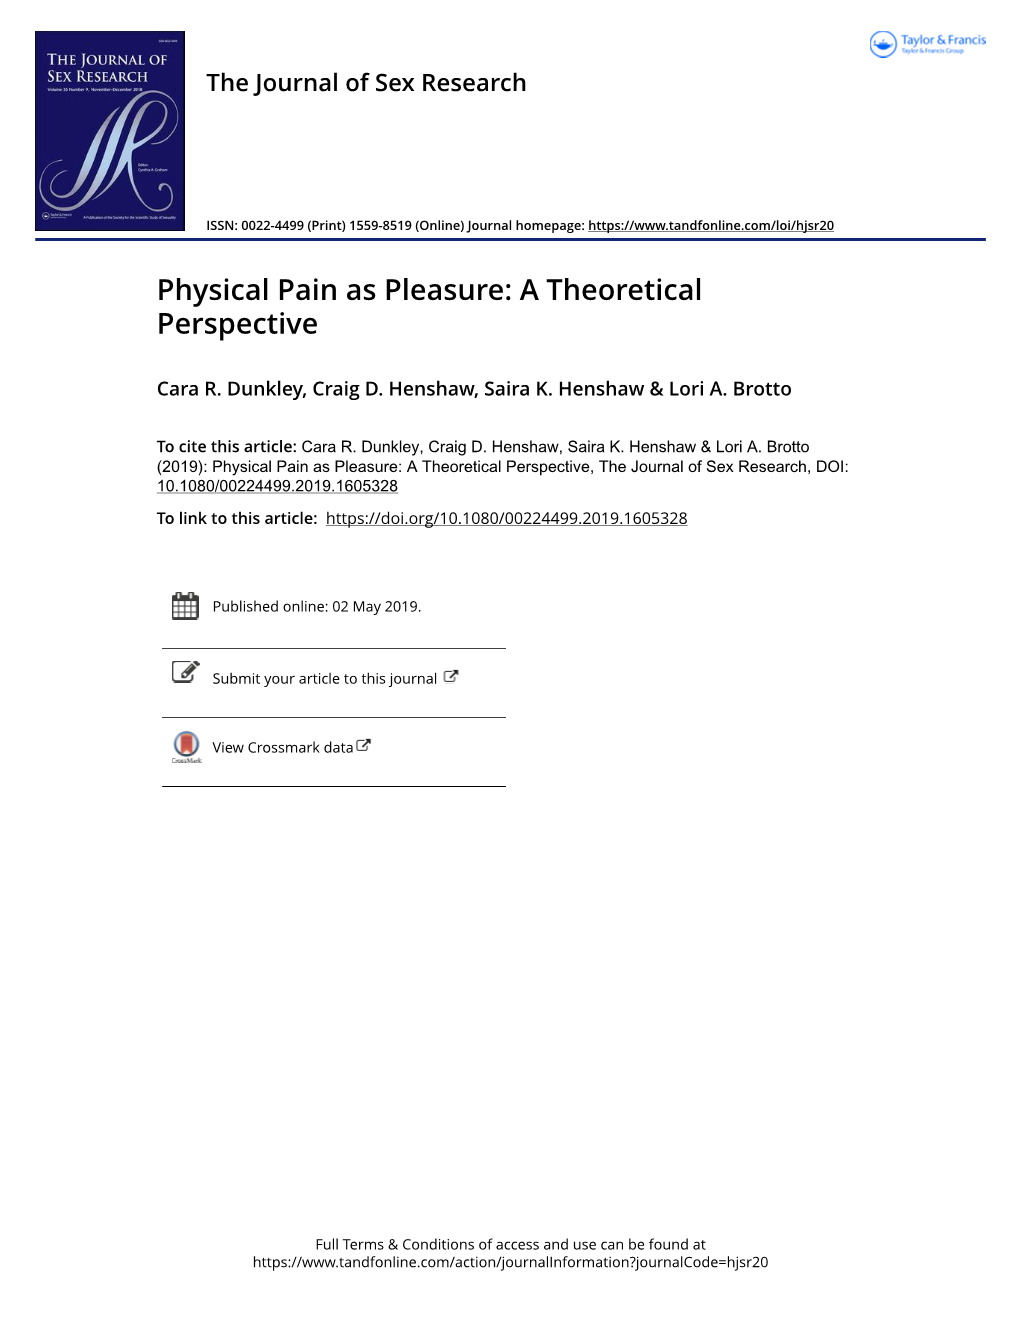 Physical Pain As Pleasure: a Theoretical Perspective